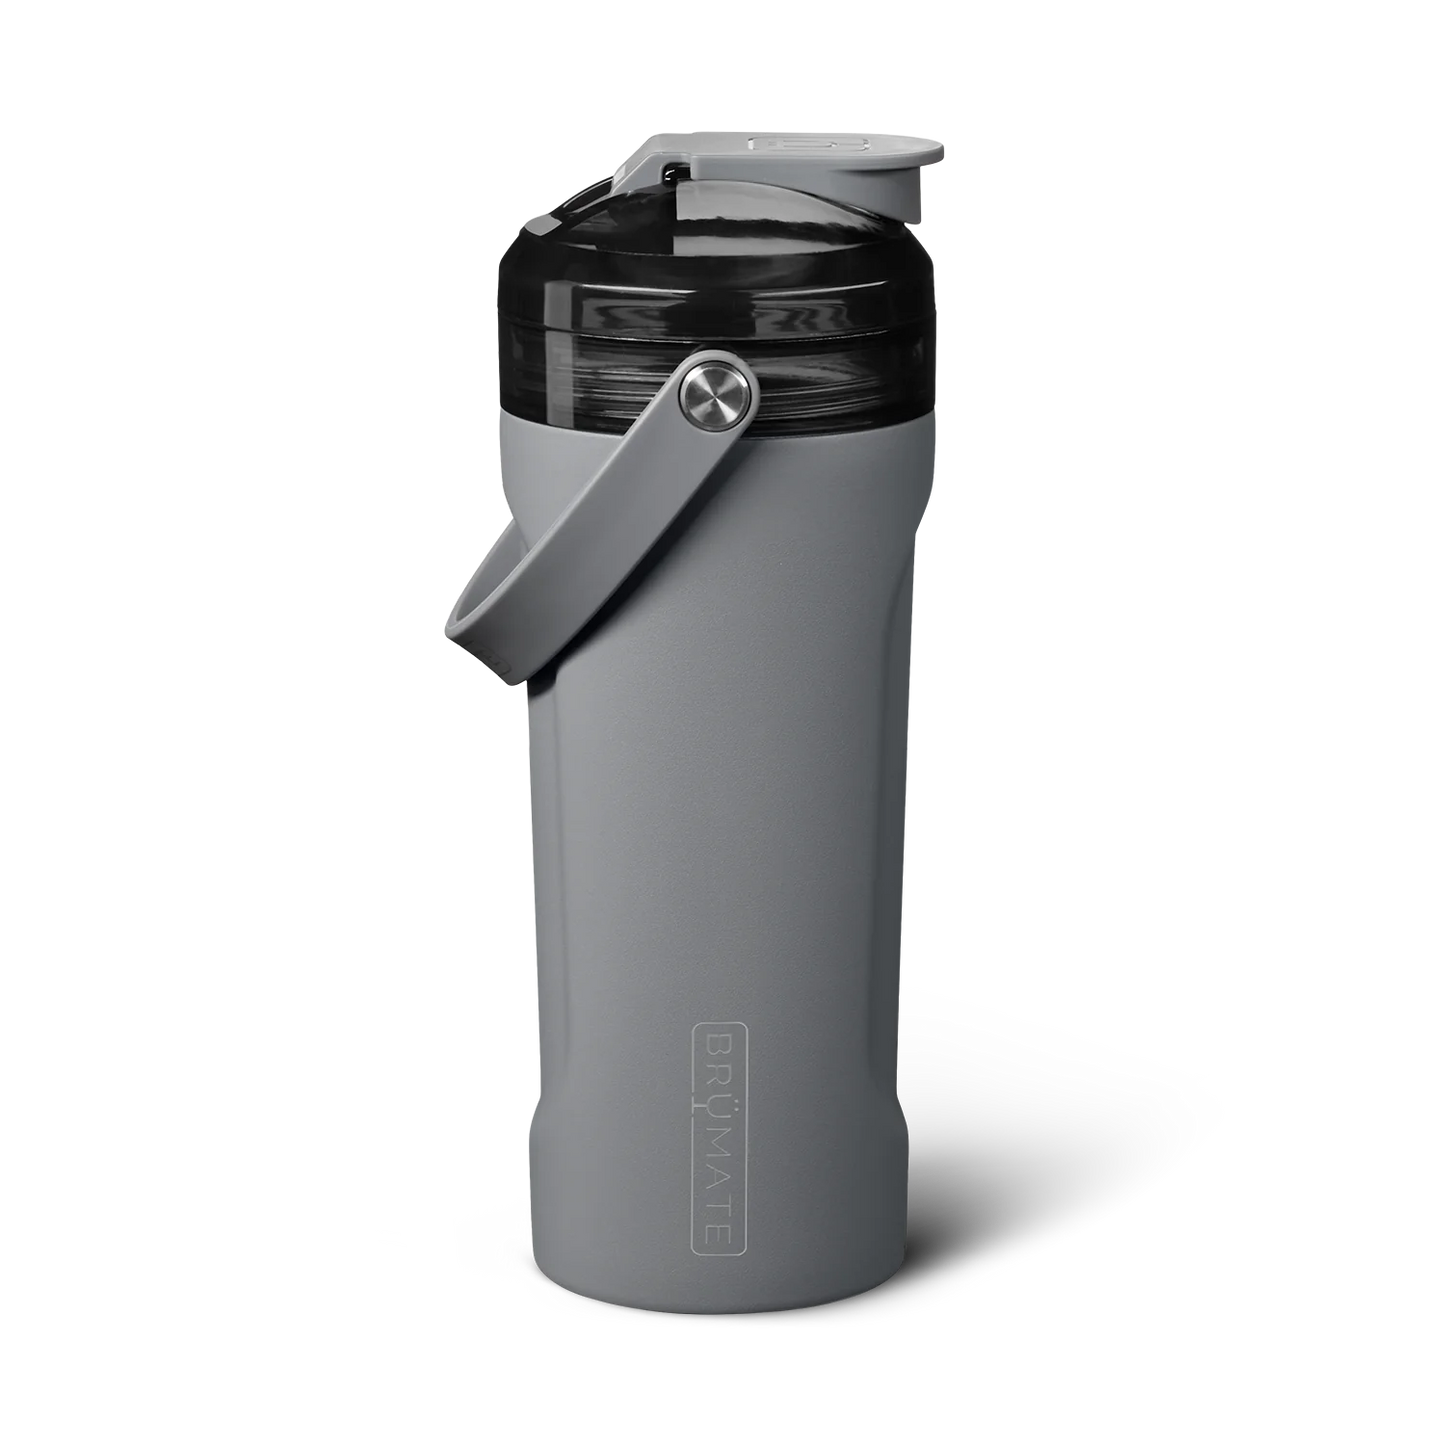 The MultiShaker is made for elevating your fitness journey. Our built-in patent-pending agitator blends your shakes, greens, and powders without any clumps, while also serving as a water infuser for herbs and fruits. It includes our BevGuard™ insulation to keep ice for 24+ hours, a spill-proof MagFlip™ lid, volume markings on the inside, a durable silicone handle, a non-slip base, and the ability to interchange tops with our MÜV or Straw Lids, making it perfect for any workout or adventure.(matte gray)